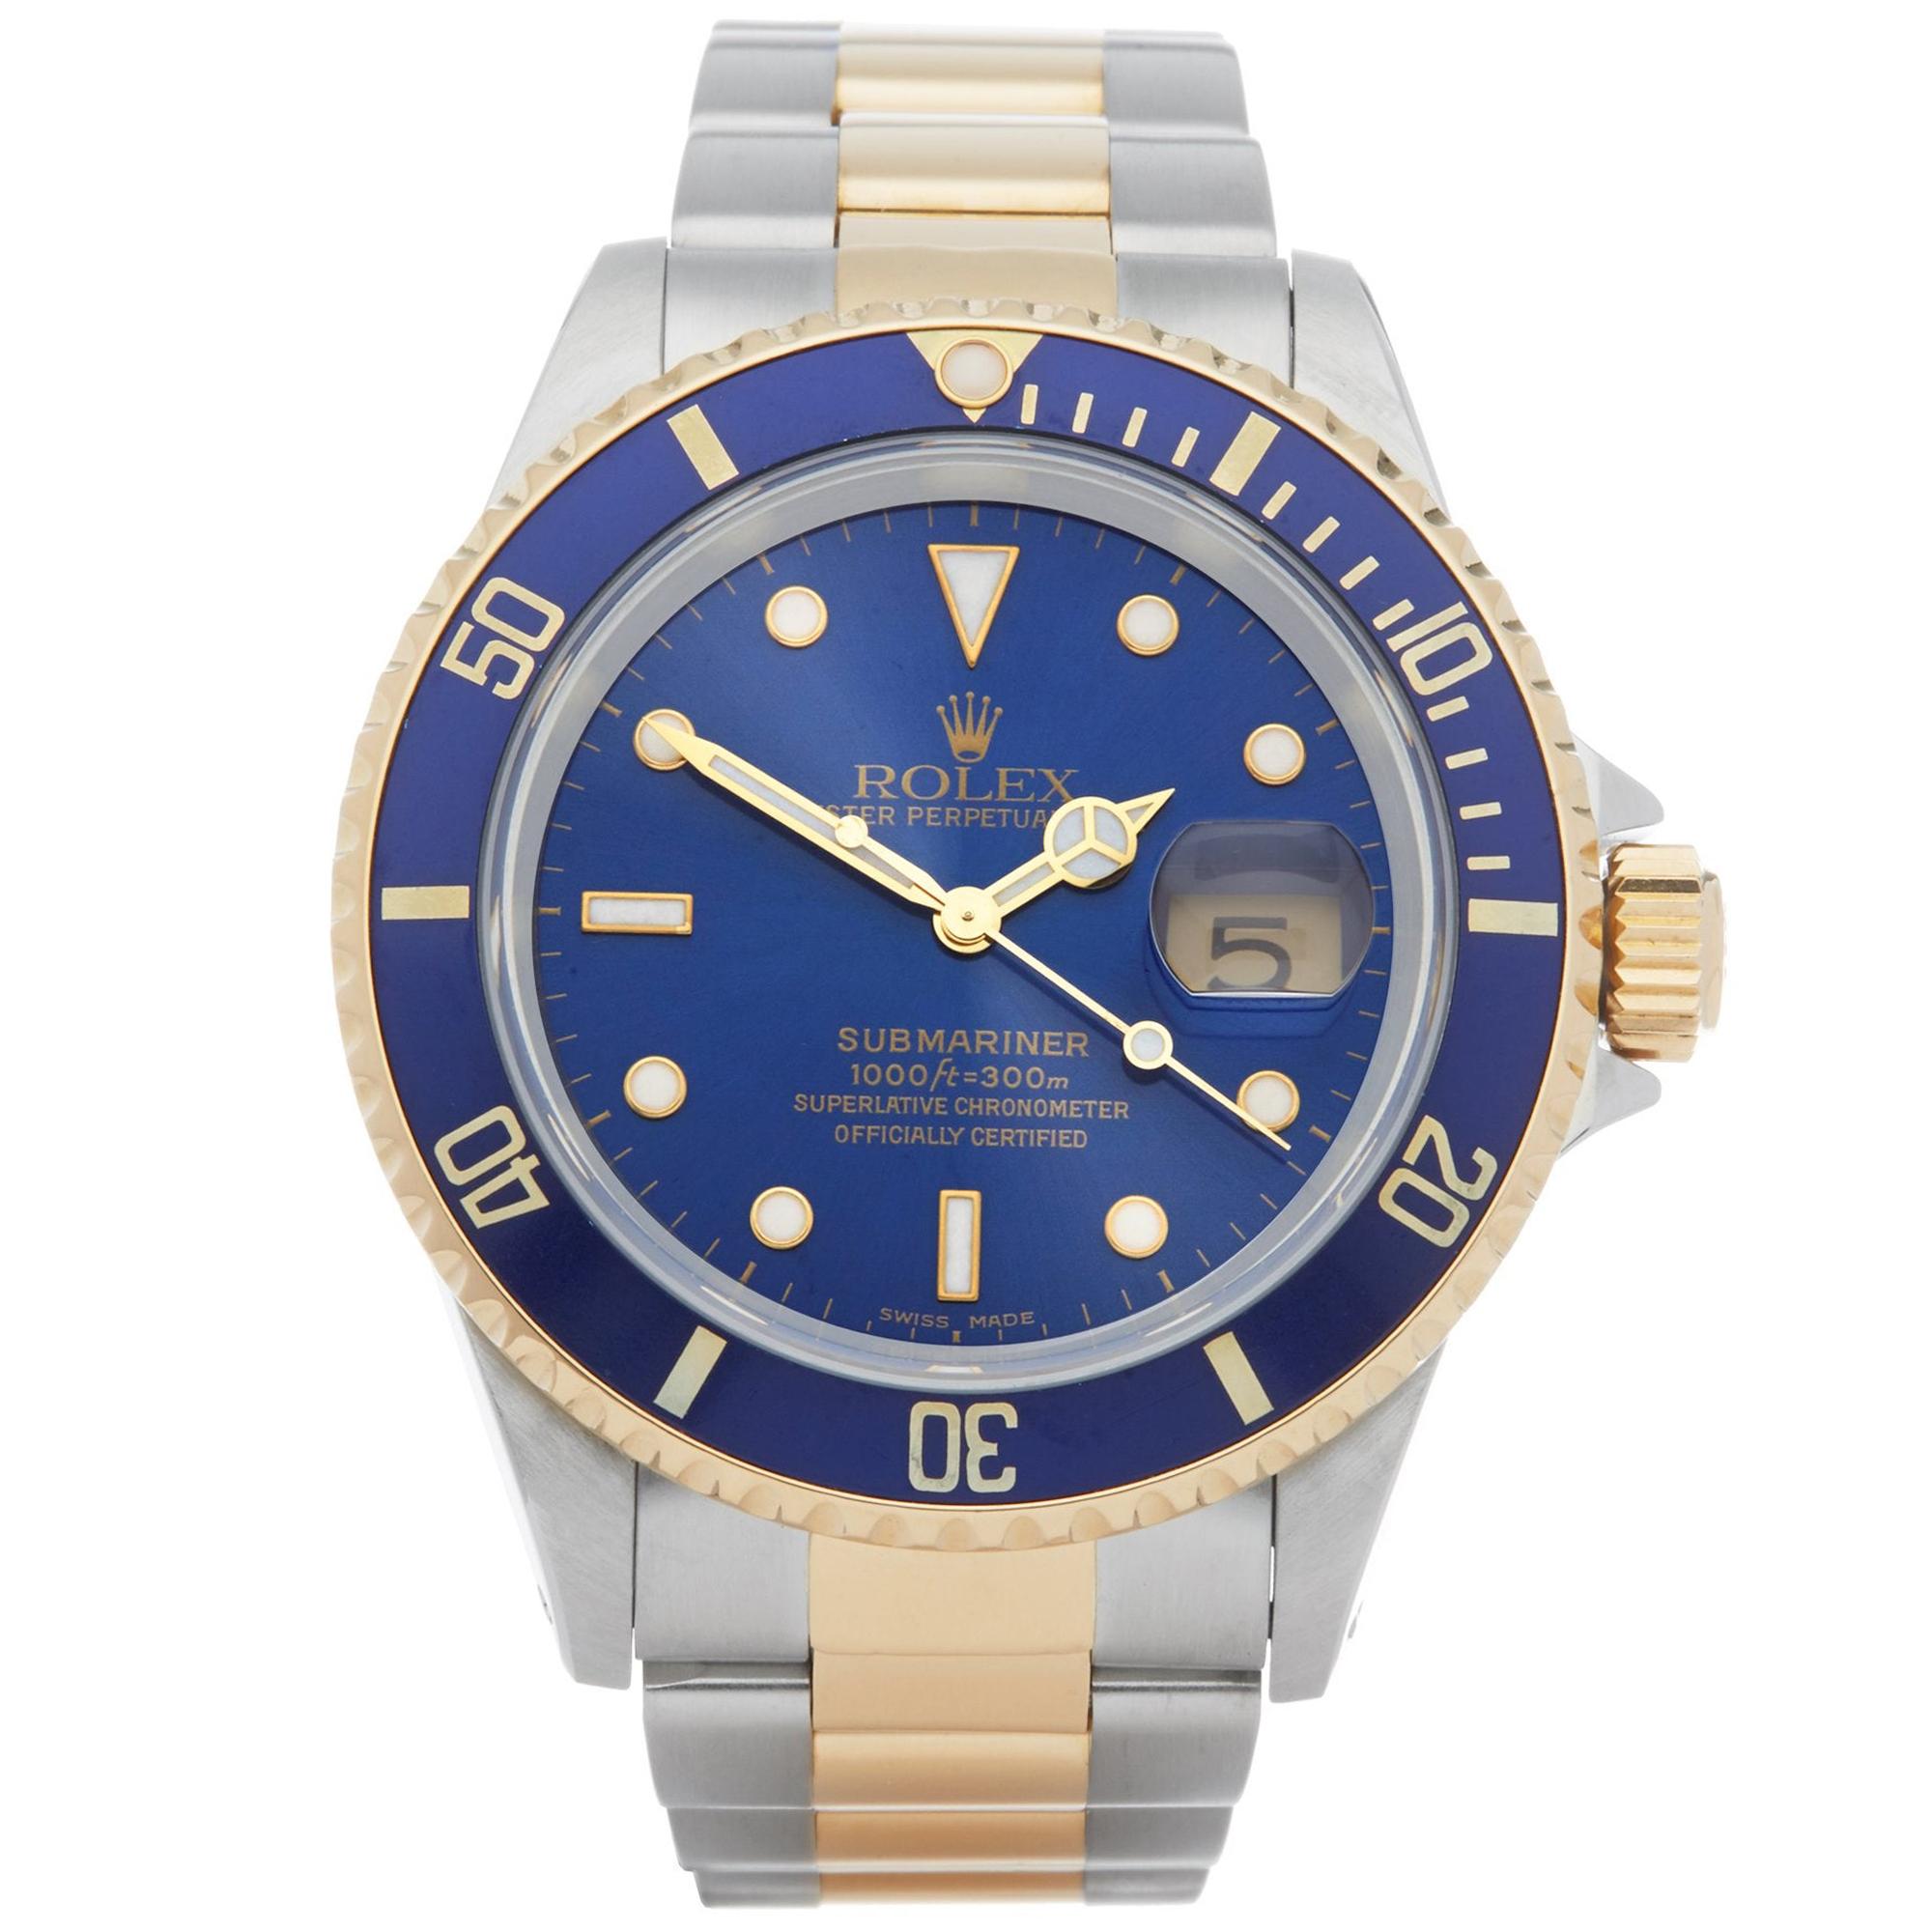 Rolex Submariner Date 16613 Men's Stainless Steel and Yellow Gold Watch